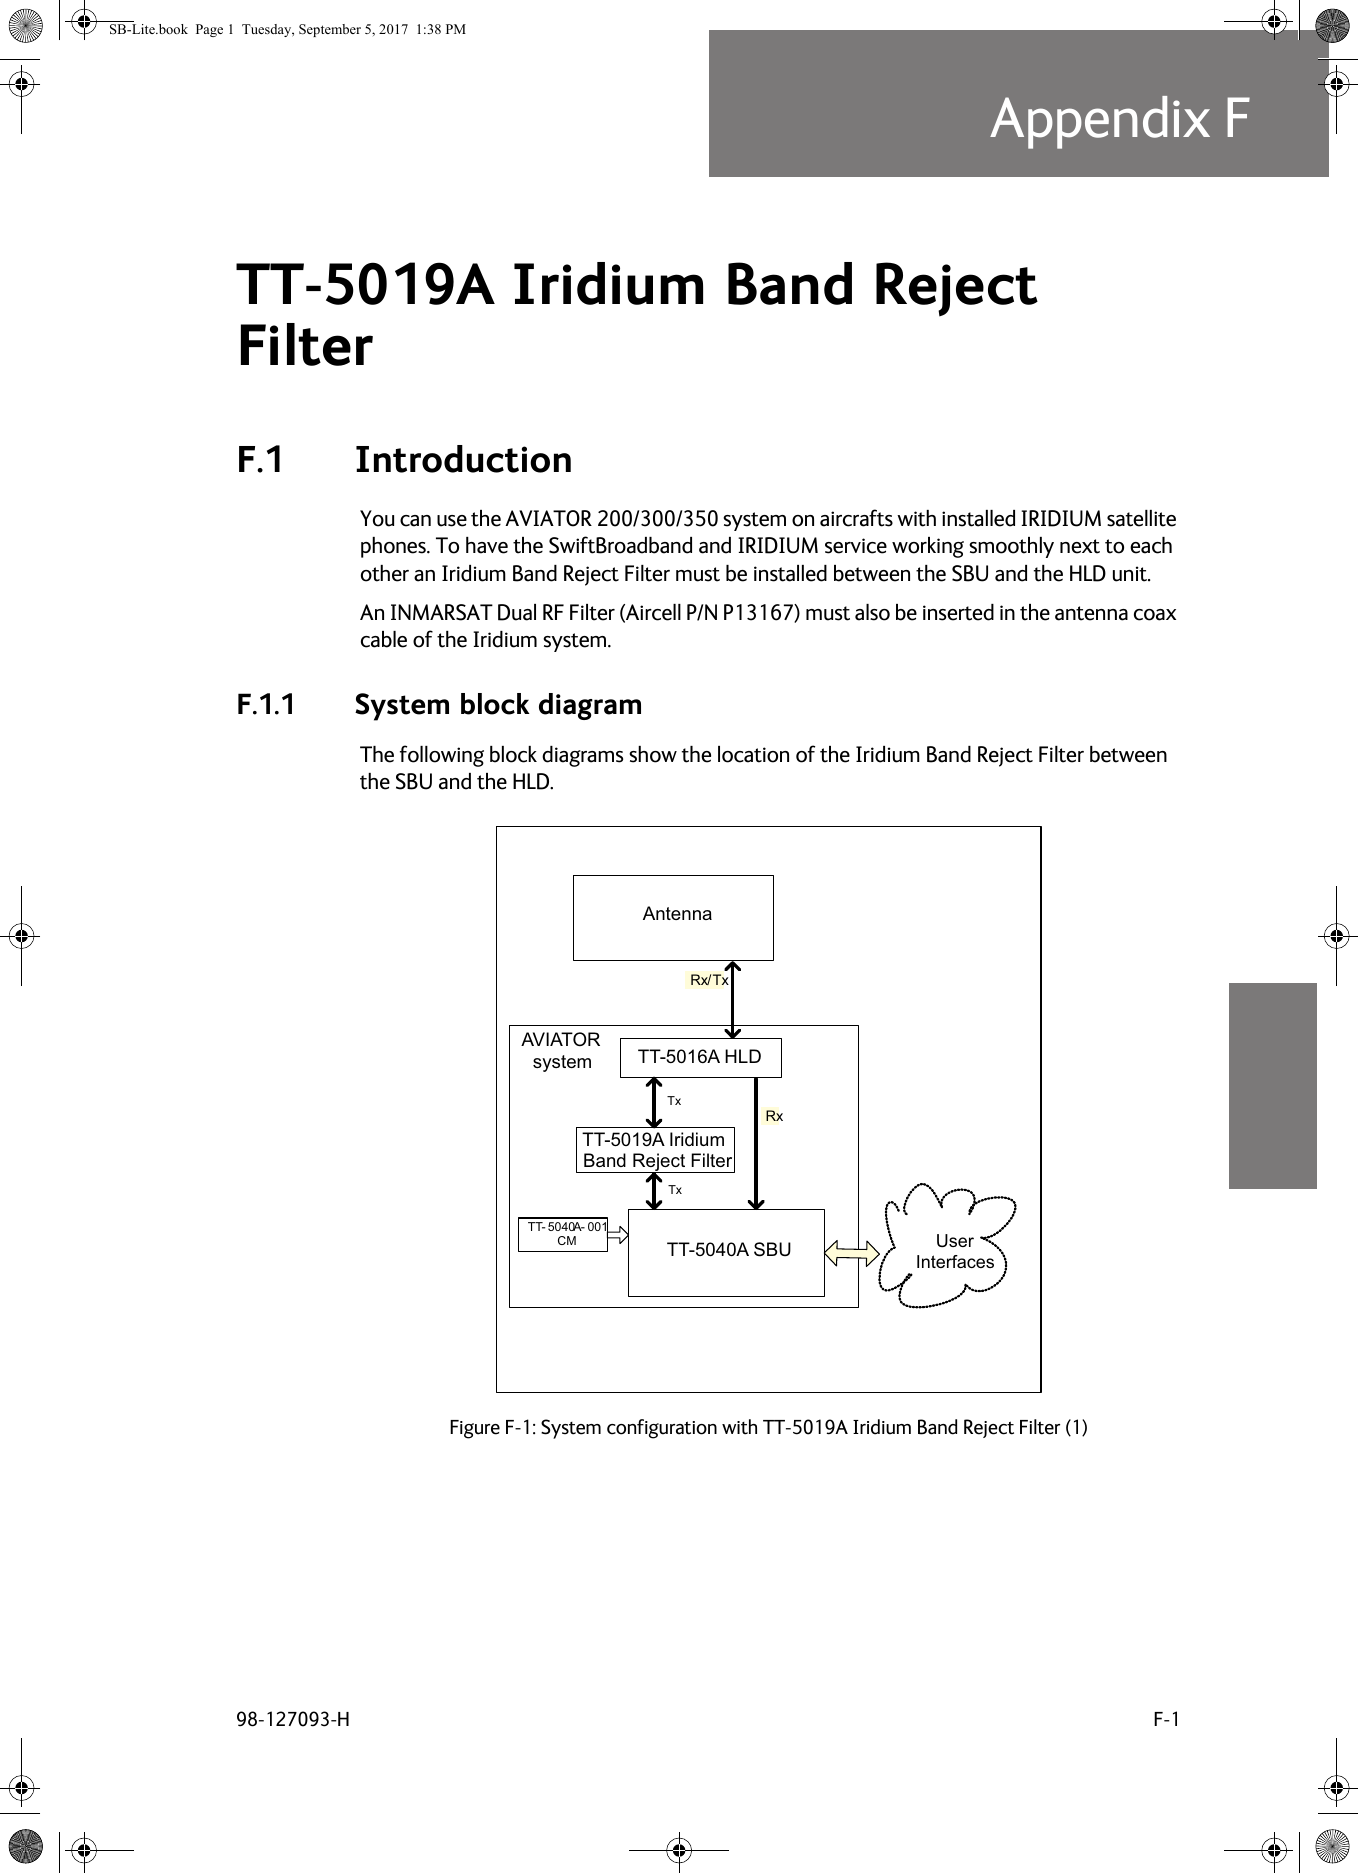 98-127093-H F-1Appendix FFFFFTT-5019A Iridium Band Reject Filter FF.1 IntroductionYou can use the AVIATOR 200/300/350 system on aircrafts with installed IRIDIUM satellite phones. To have the SwiftBroadband and IRIDIUM service working smoothly next to each other an Iridium Band Reject Filter must be installed between the SBU and the HLD unit.An INMARSAT Dual RF Filter (Aircell P/N P13167) must also be inserted in the antenna coax cable of the Iridium system.F.1.1 System block diagramThe following block diagrams show the location of the Iridium Band Reject Filter between the SBU and the HLD.Figure F-1:  System configuration with TT-5019A Iridium Band Reject Filter (1)$QWHQQD$9,$725V\VWHP77 $ &amp;0 8VHU,QWHUIDFHV5[5[7[7[77$,ULGLXP%DQG5HMHFW)LOWHU7[77$+/&apos;77$6%8SB-Lite.book  Page 1  Tuesday, September 5, 2017  1:38 PM